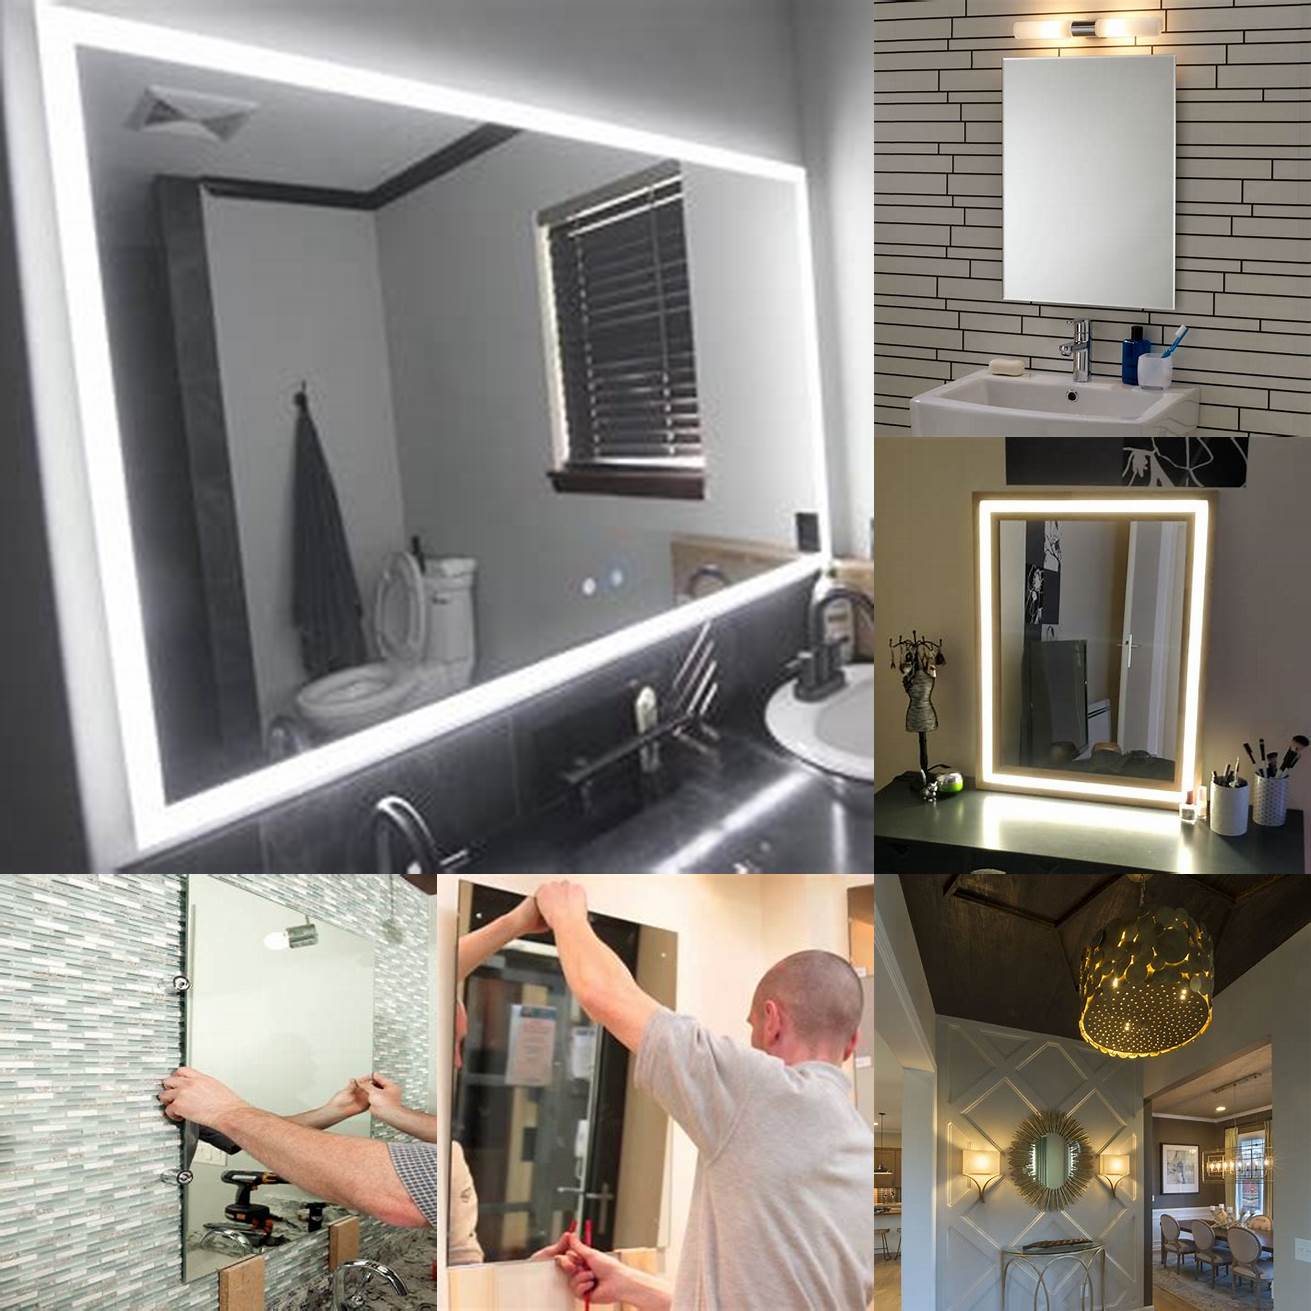 Install the mirrors lighting and other accessories